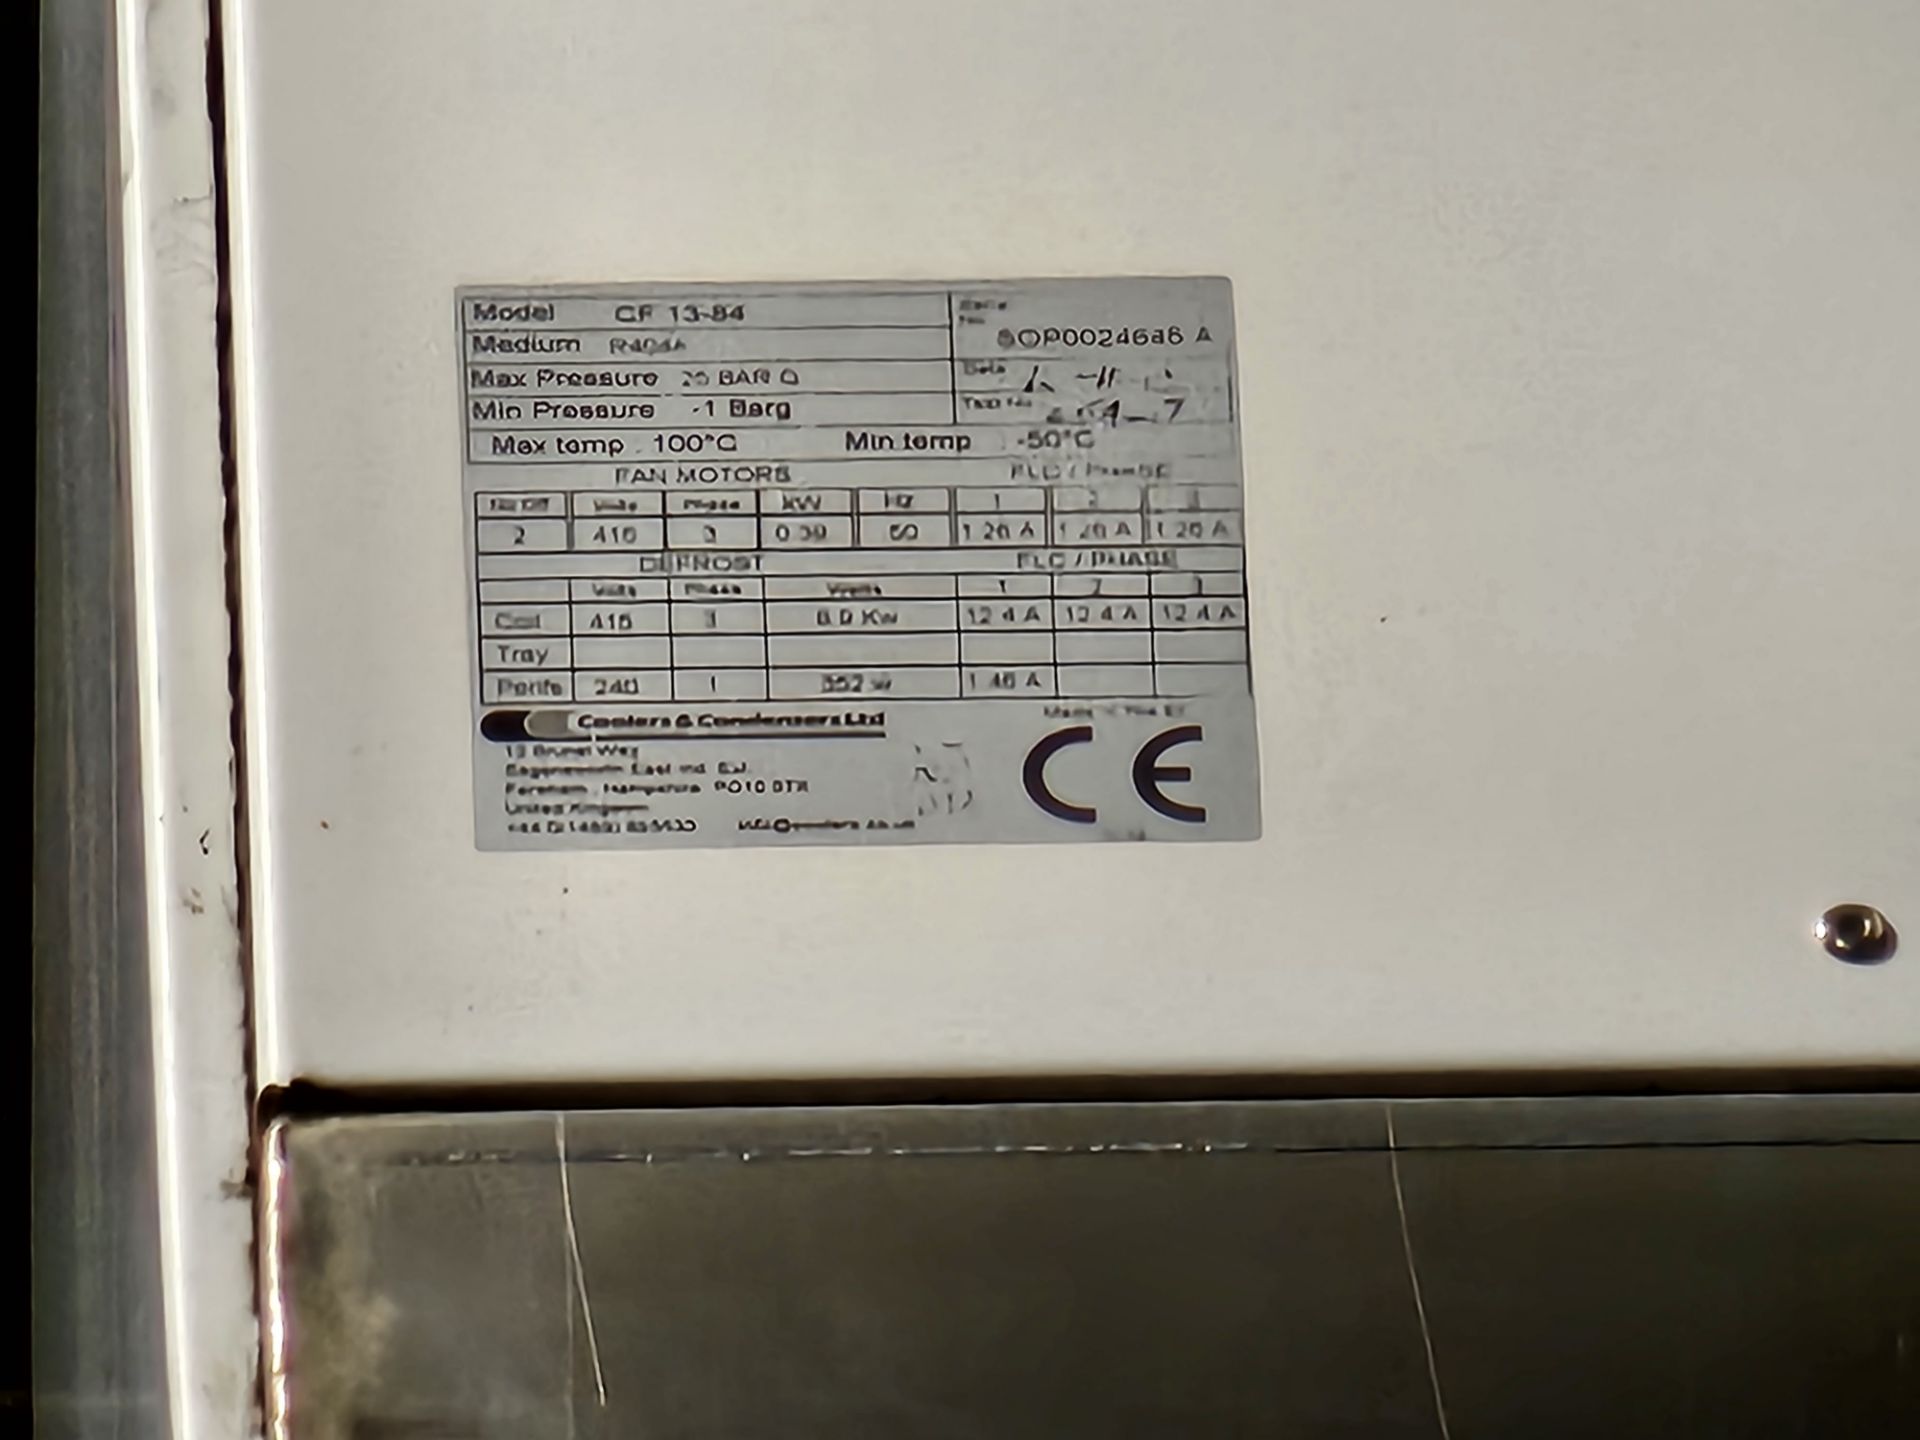 Coolers and Condensers Limited CF 13-84 Chiller Unit, Serial Number: SOP00246ABA - Image 2 of 2